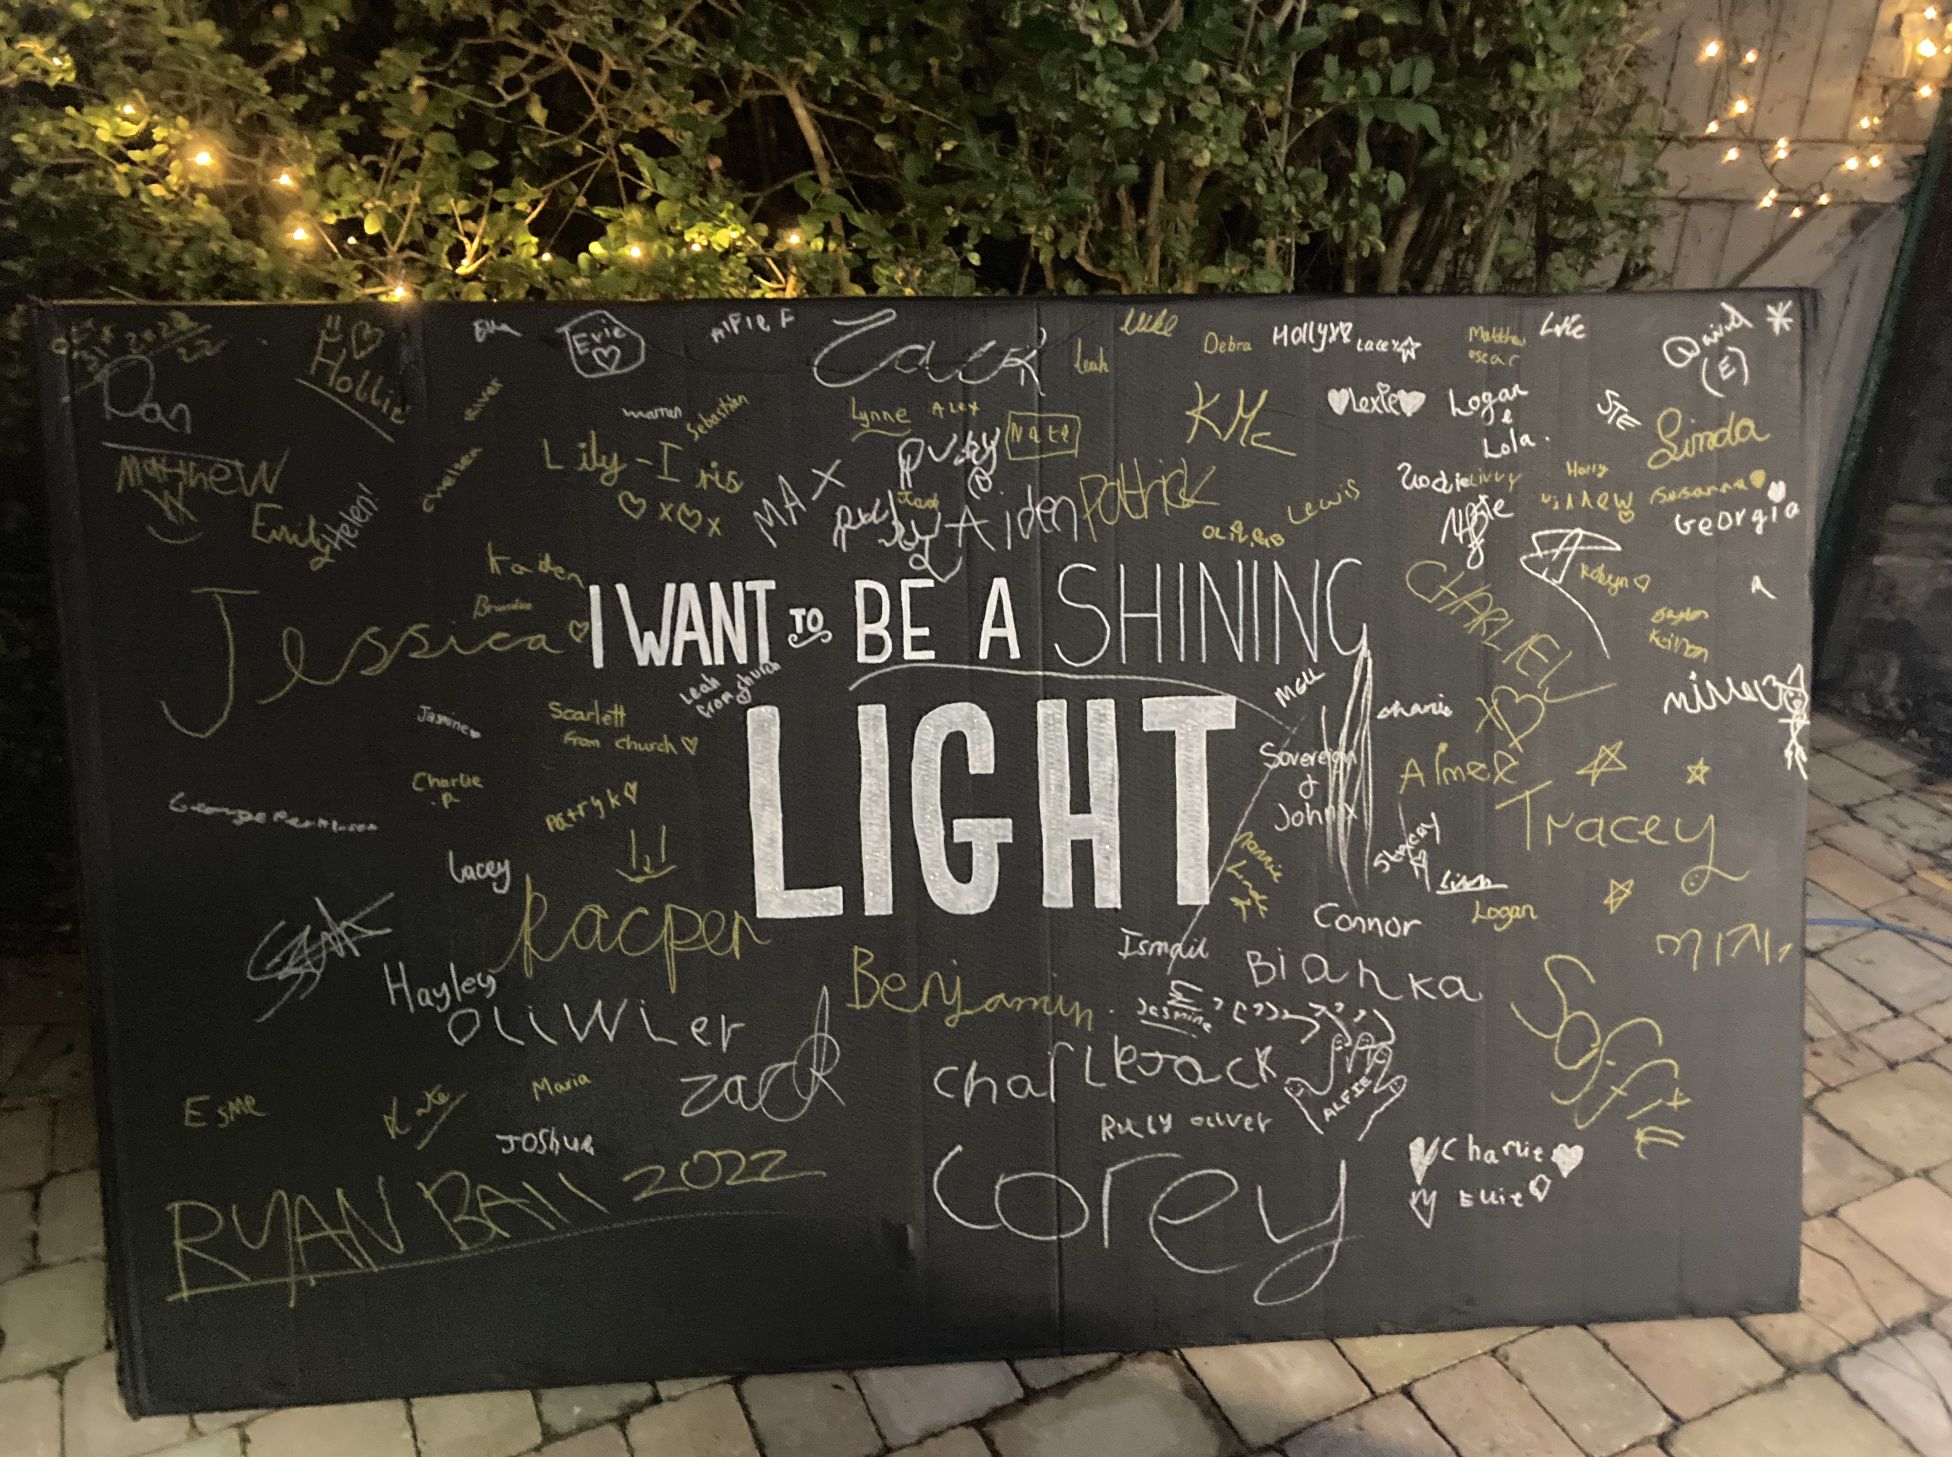 A large surface emblazoned I want to be a shining light, and signed by dozens of people in glitter pen